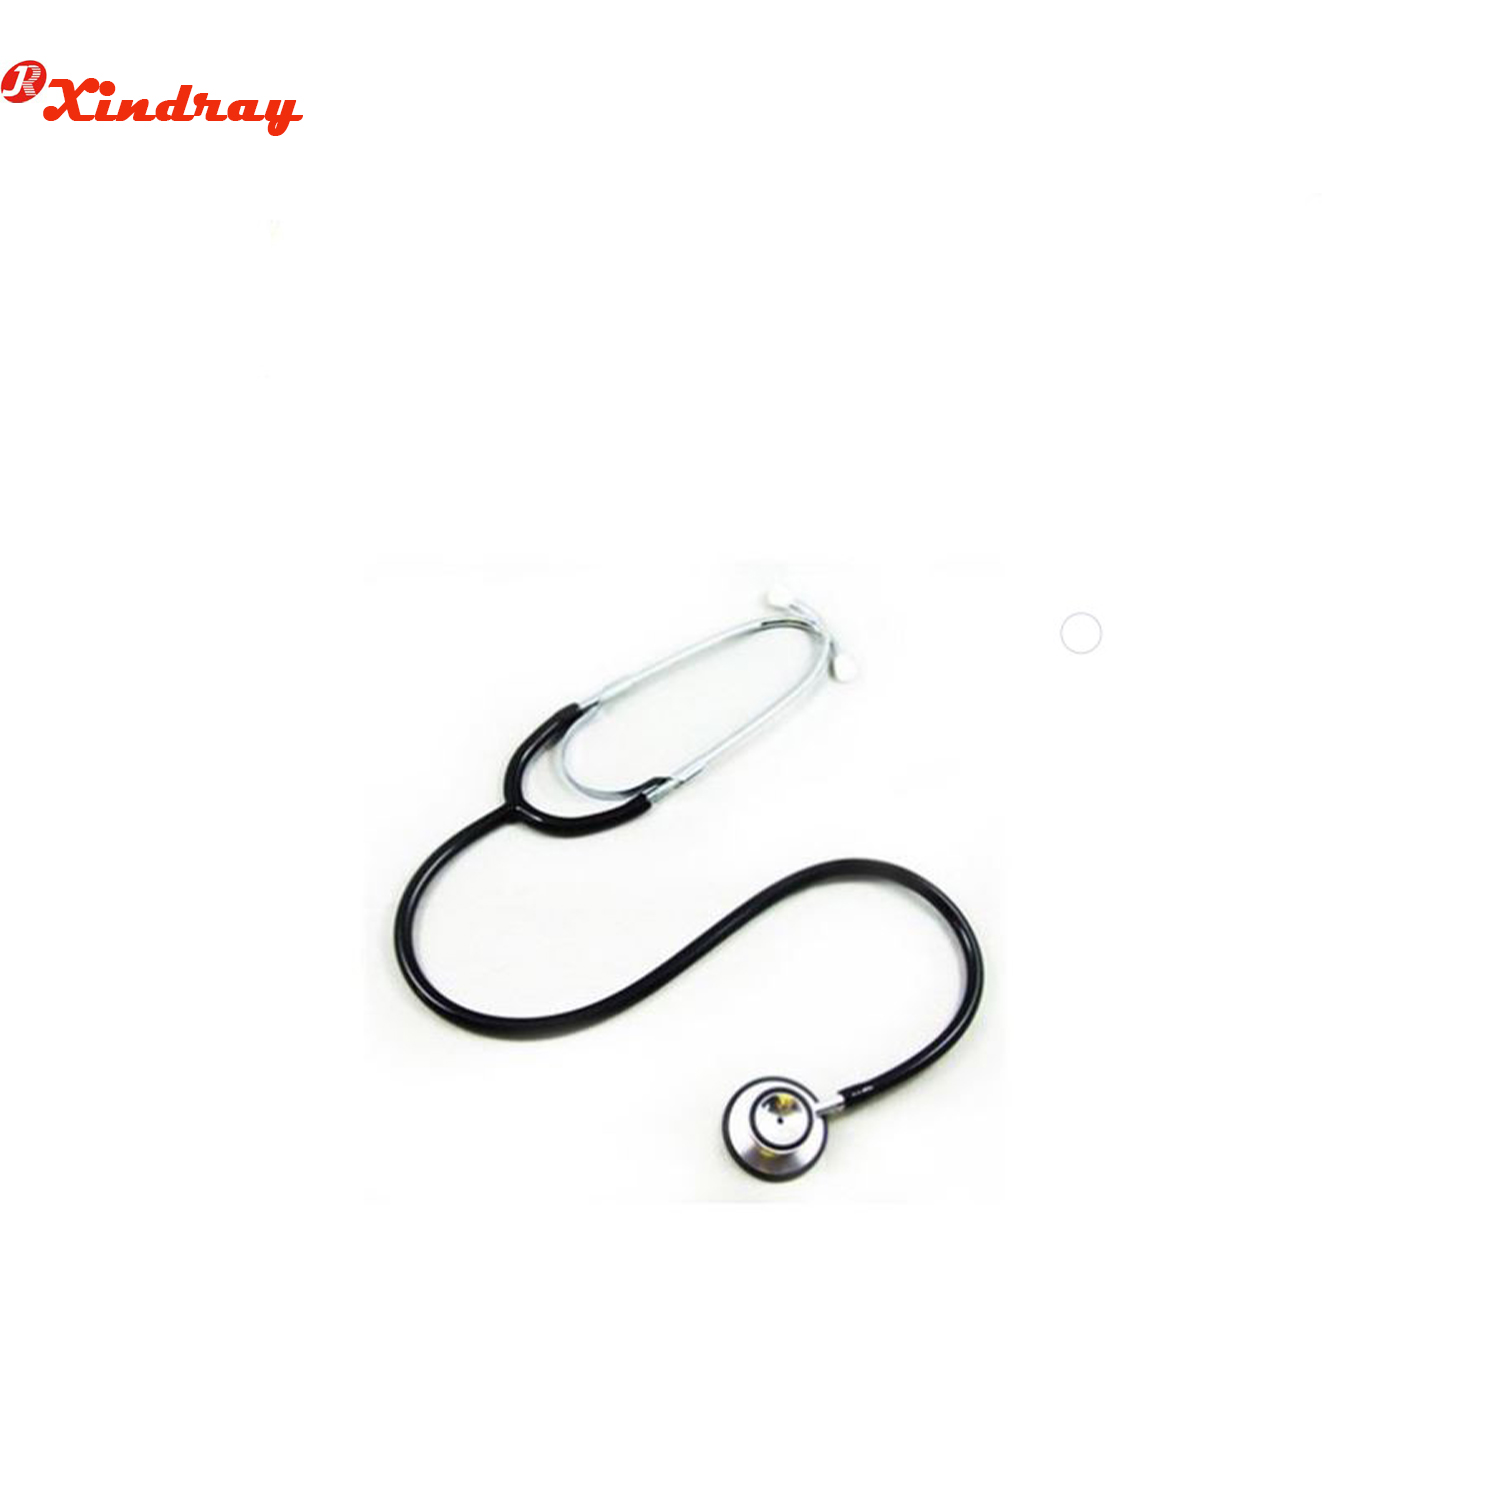 Dual Head Stethoscope With Anti-Chill Ring